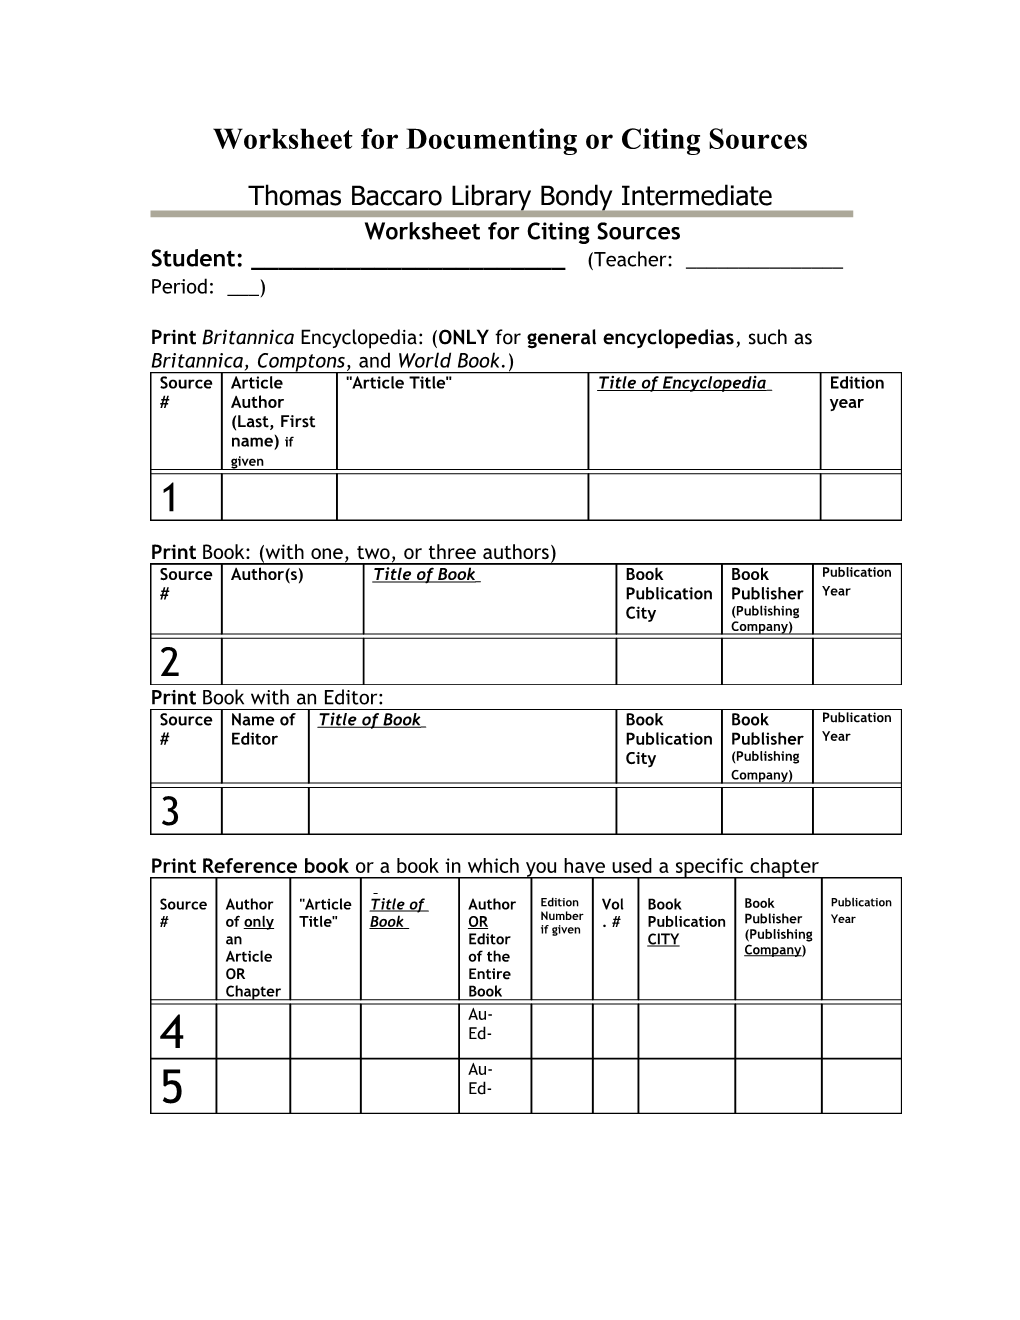 Worksheet for Documenting Or Citing Sources